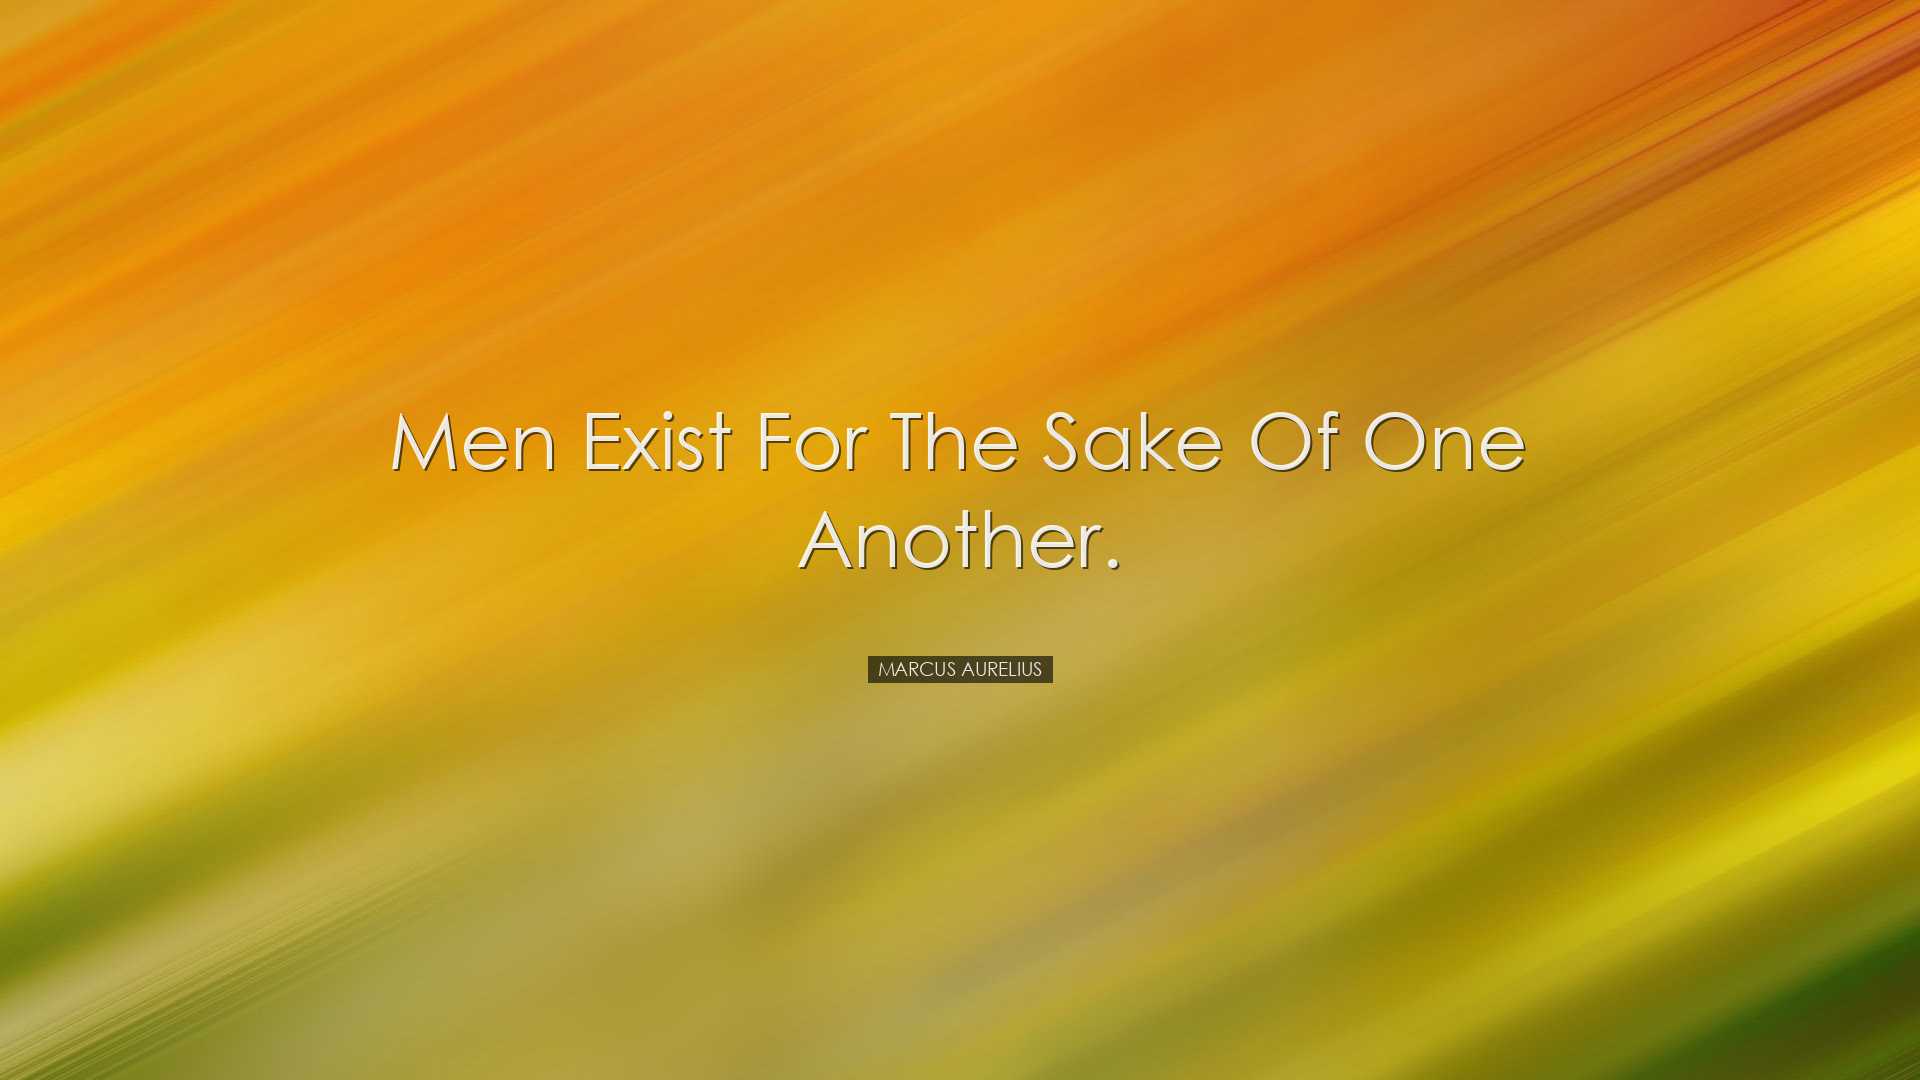 Men exist for the sake of one another. - Marcus Aurelius